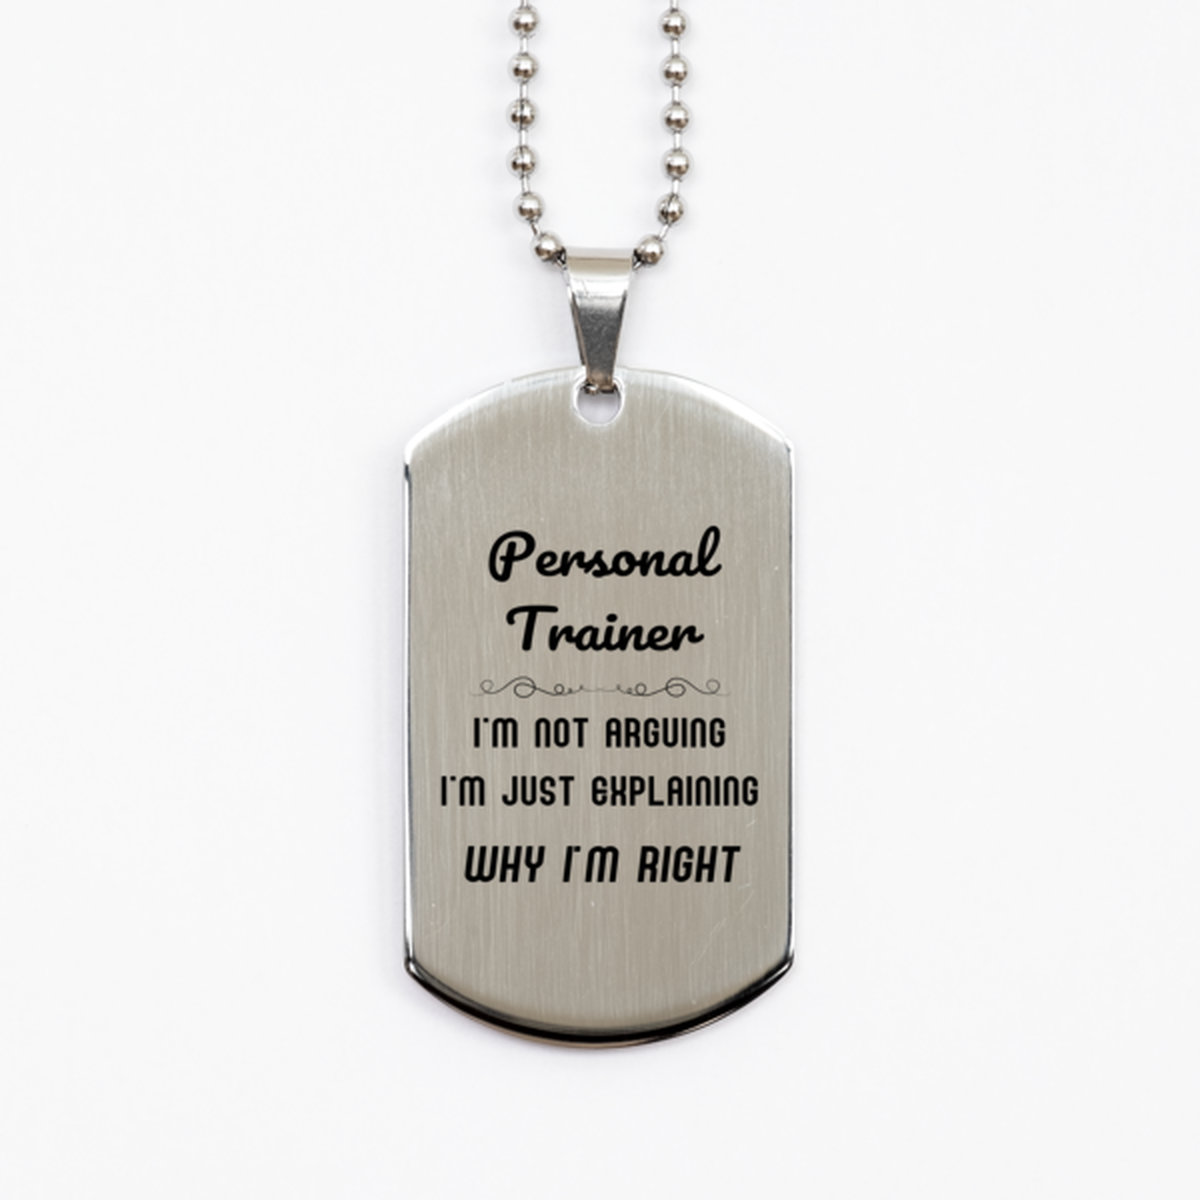 Personal Trainer I'm not Arguing. I'm Just Explaining Why I'm RIGHT Silver Dog Tag, Funny Saying Quote Personal Trainer Gifts For Personal Trainer Graduation Birthday Christmas Gifts for Men Women Coworker